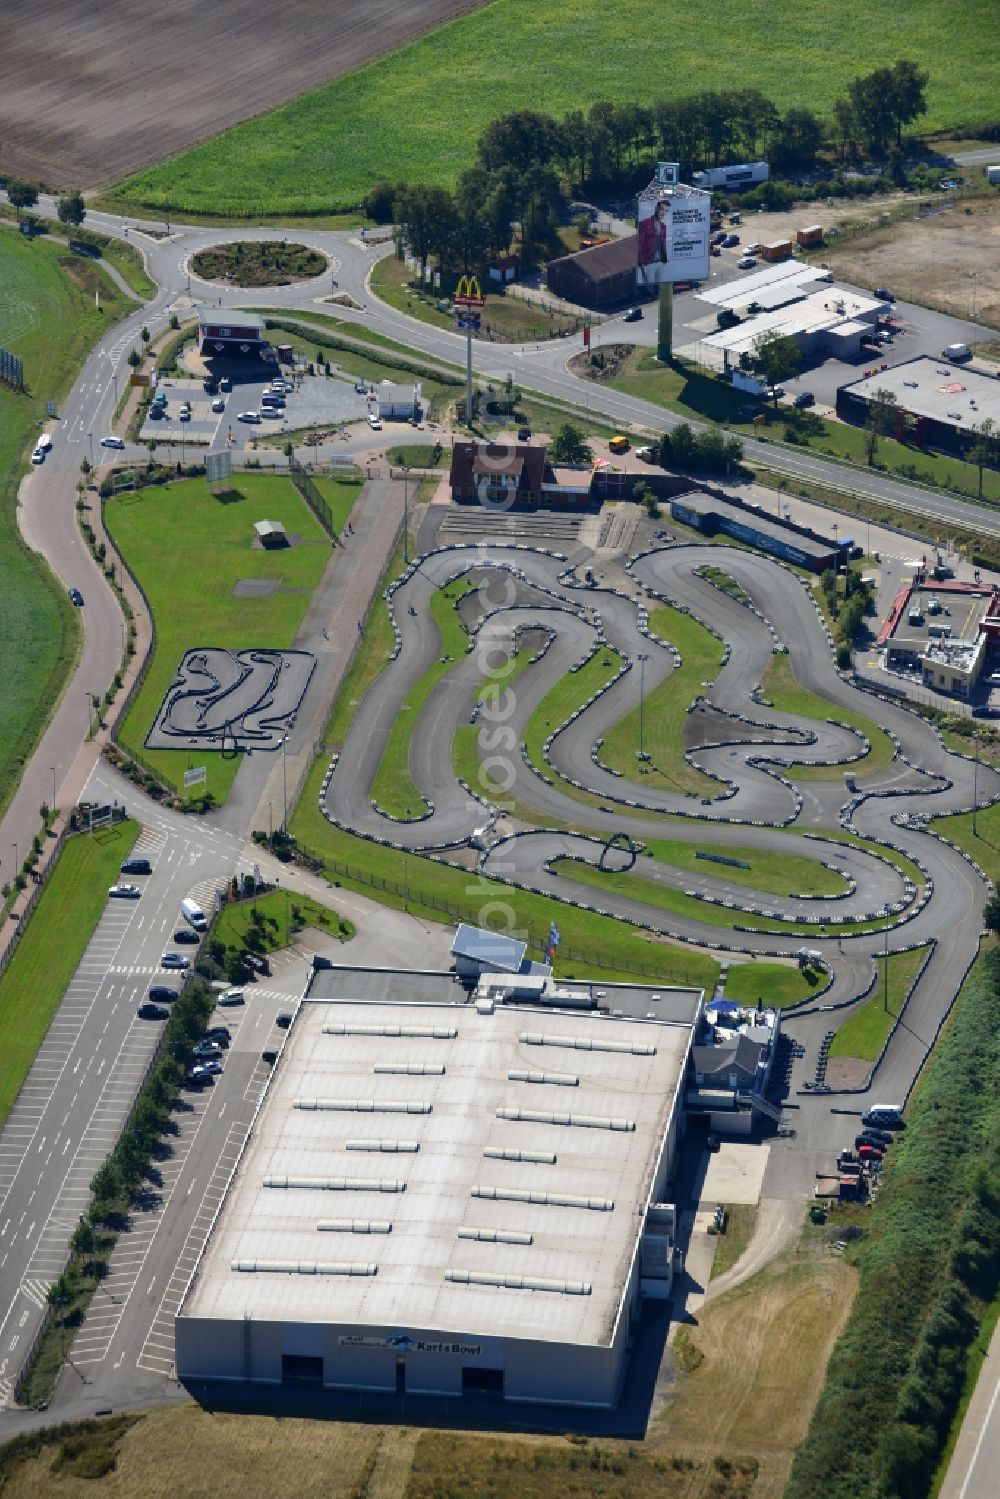 Bispingen from above - Site of the go-kart race track Ralf Schumacher Kart & Bowl at the BAB federal motorway E45 - A7 Bispingen in the state of Lower Saxony